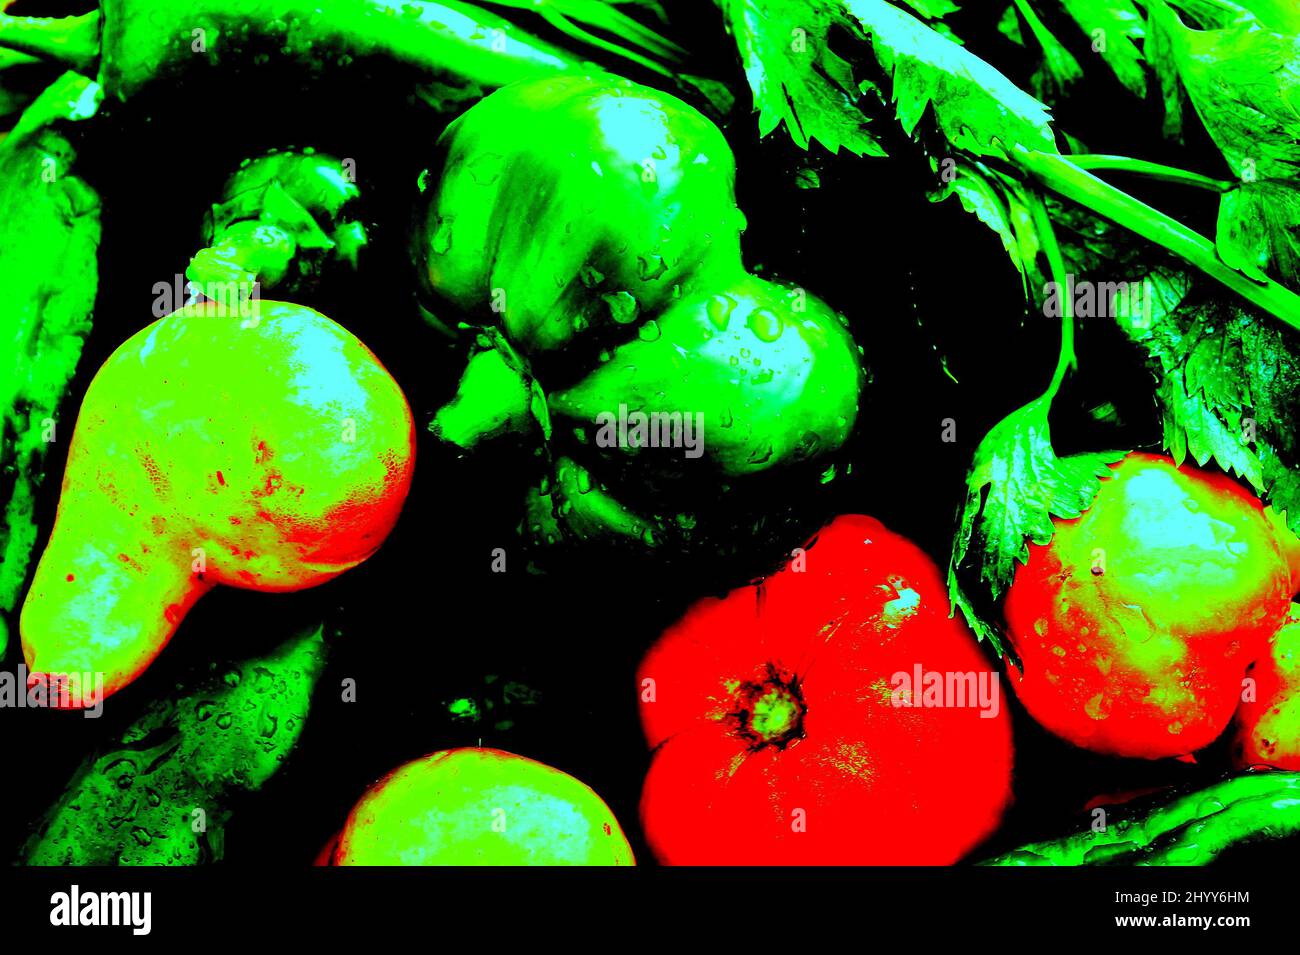 illustration of vegetables from the garden Stock Photo